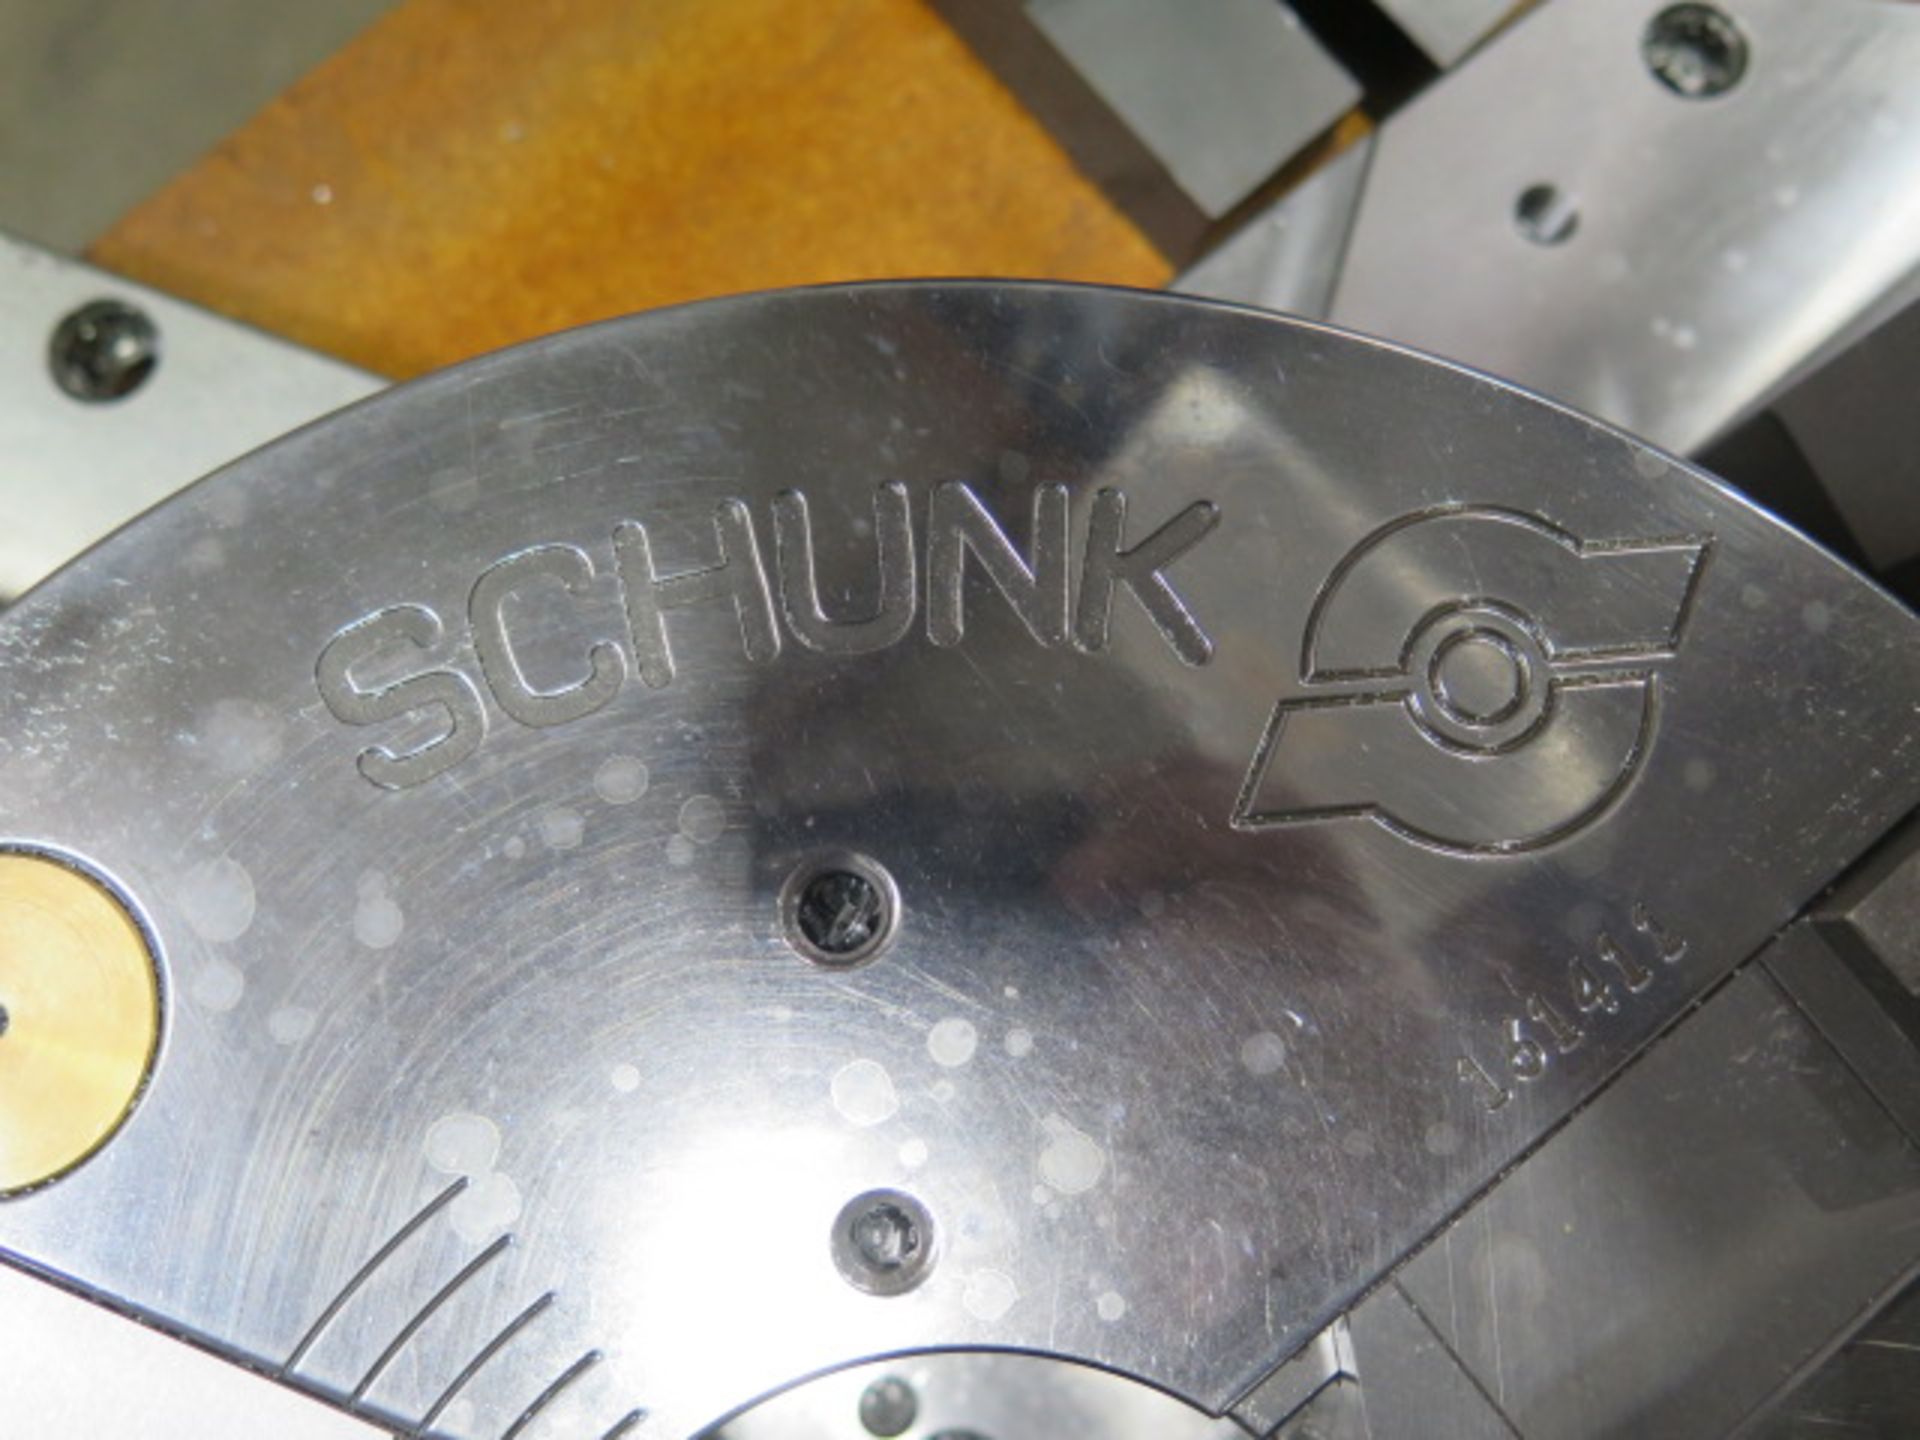 Shunk “ROTA-S flex 700” 31” 3-Jaw Chuck w/ Mounting Base (SOLD AS-IS - NO WARRANTY) - Image 11 of 11